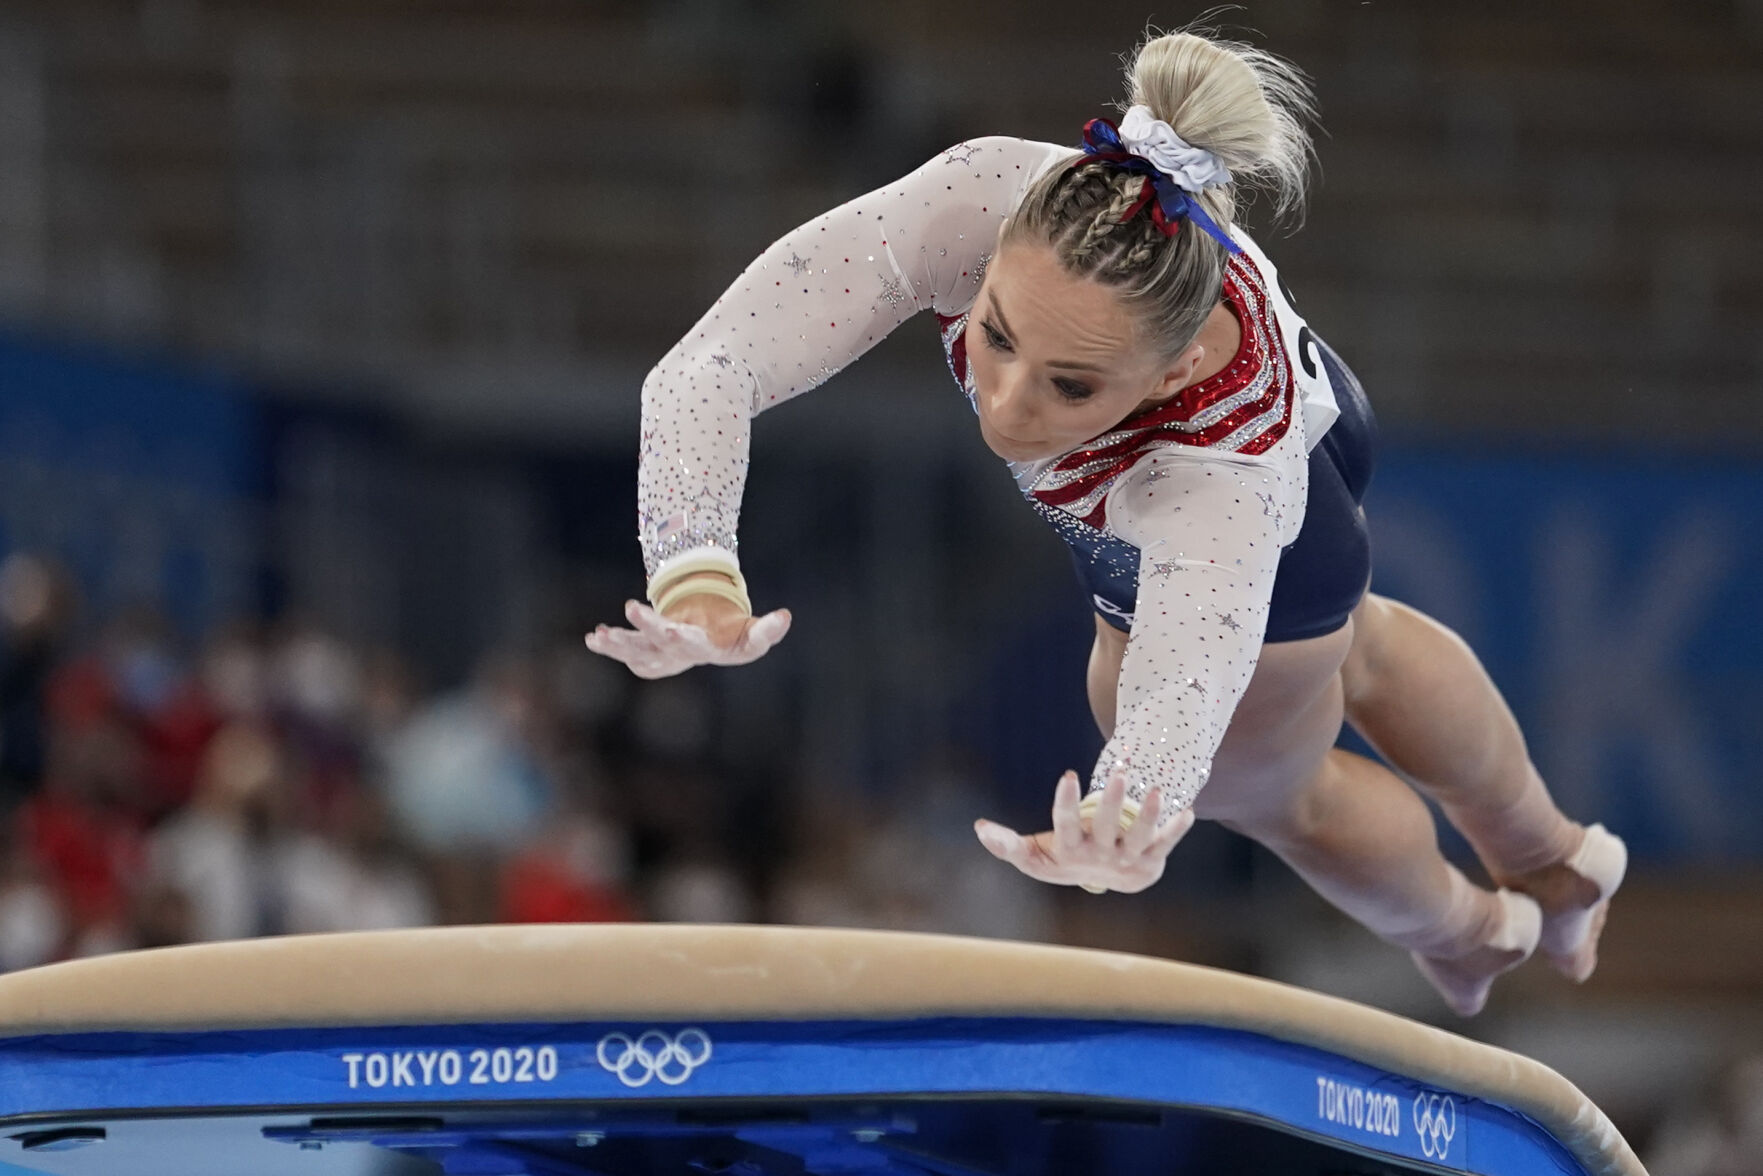 Olympic medalist MyKayla Skinner super stoked to open gymnastics tour at Tucson Arena pic